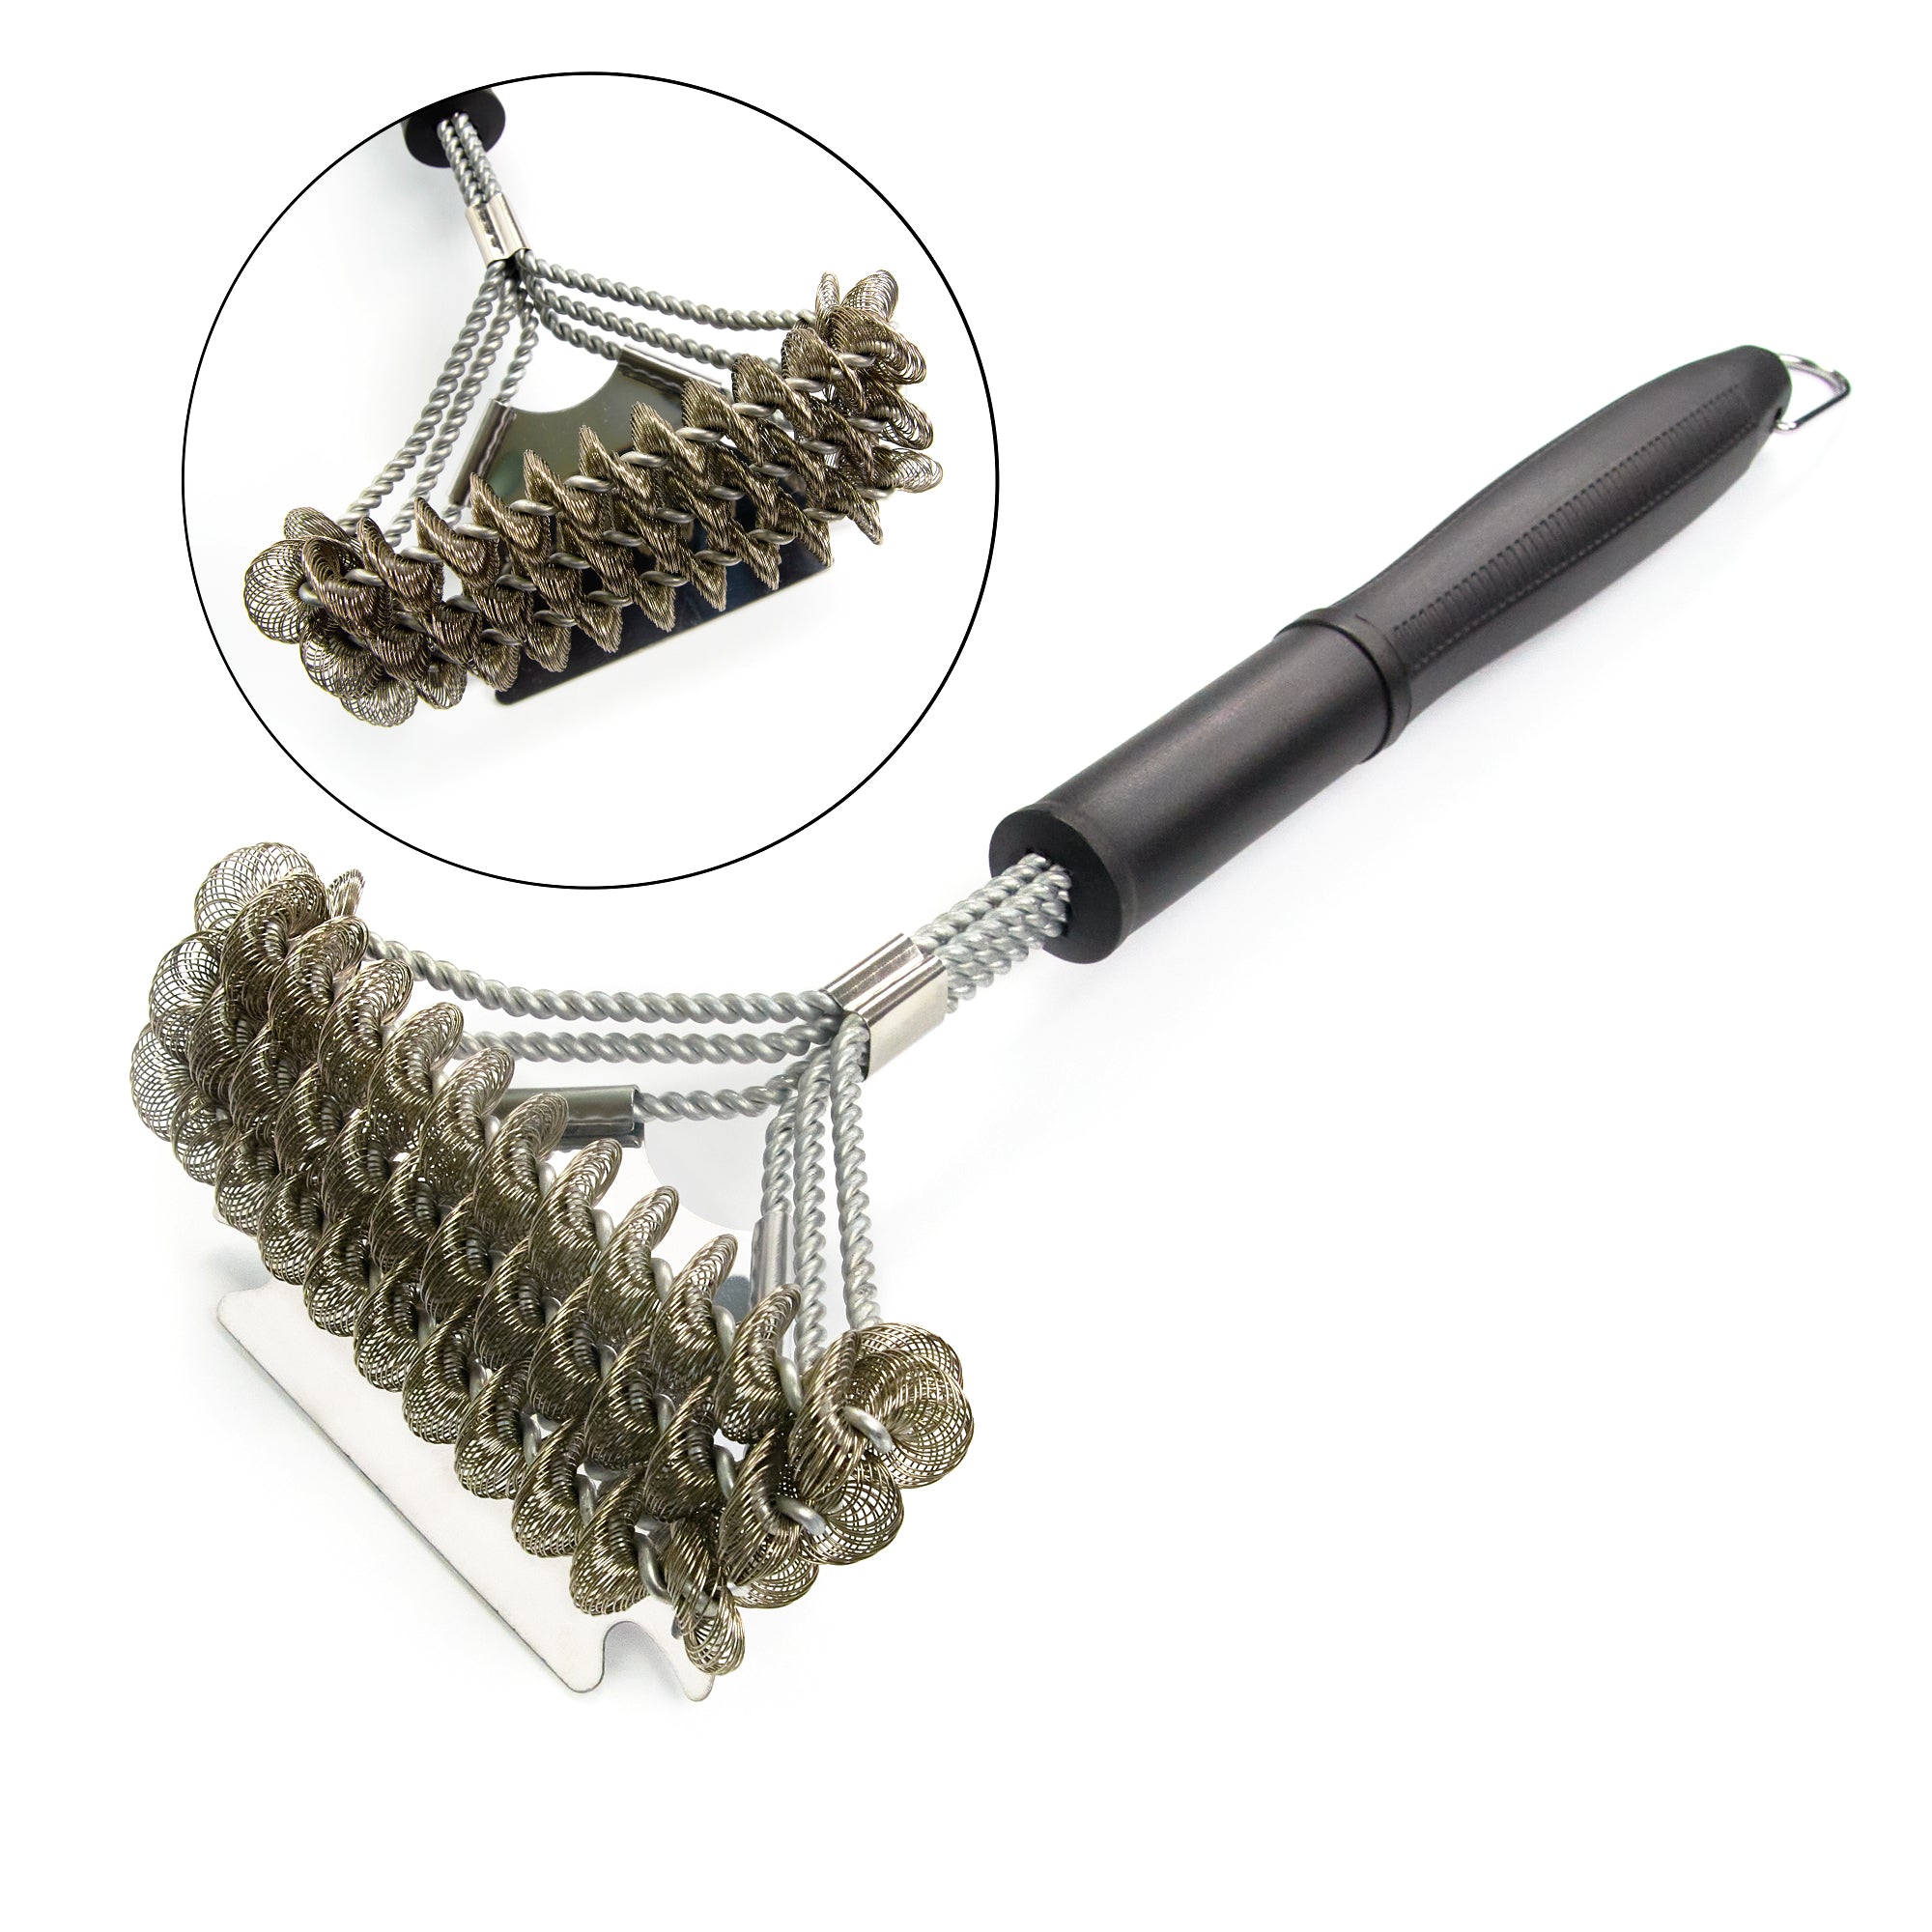 Metal brush for cleaning grills and grates